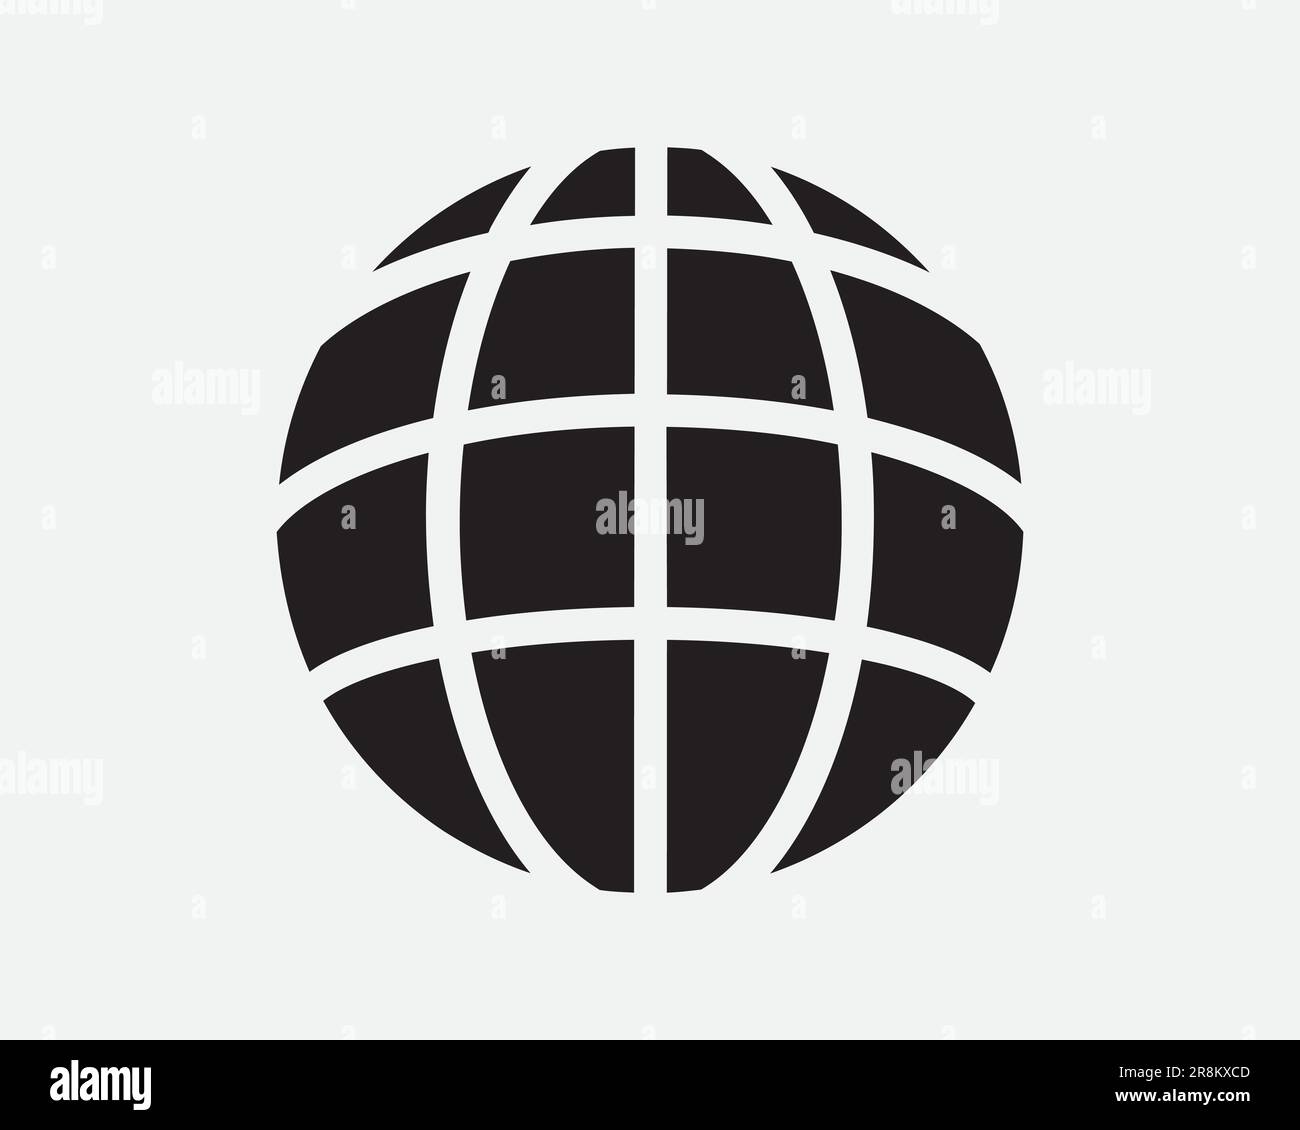 Globe Icon. Earth Global Planet Worldwide Sphere Round Circular Wire 3D Shape Black White Sign Symbol Illustration Artwork Graphic Clipart EPS Vector Stock Vector